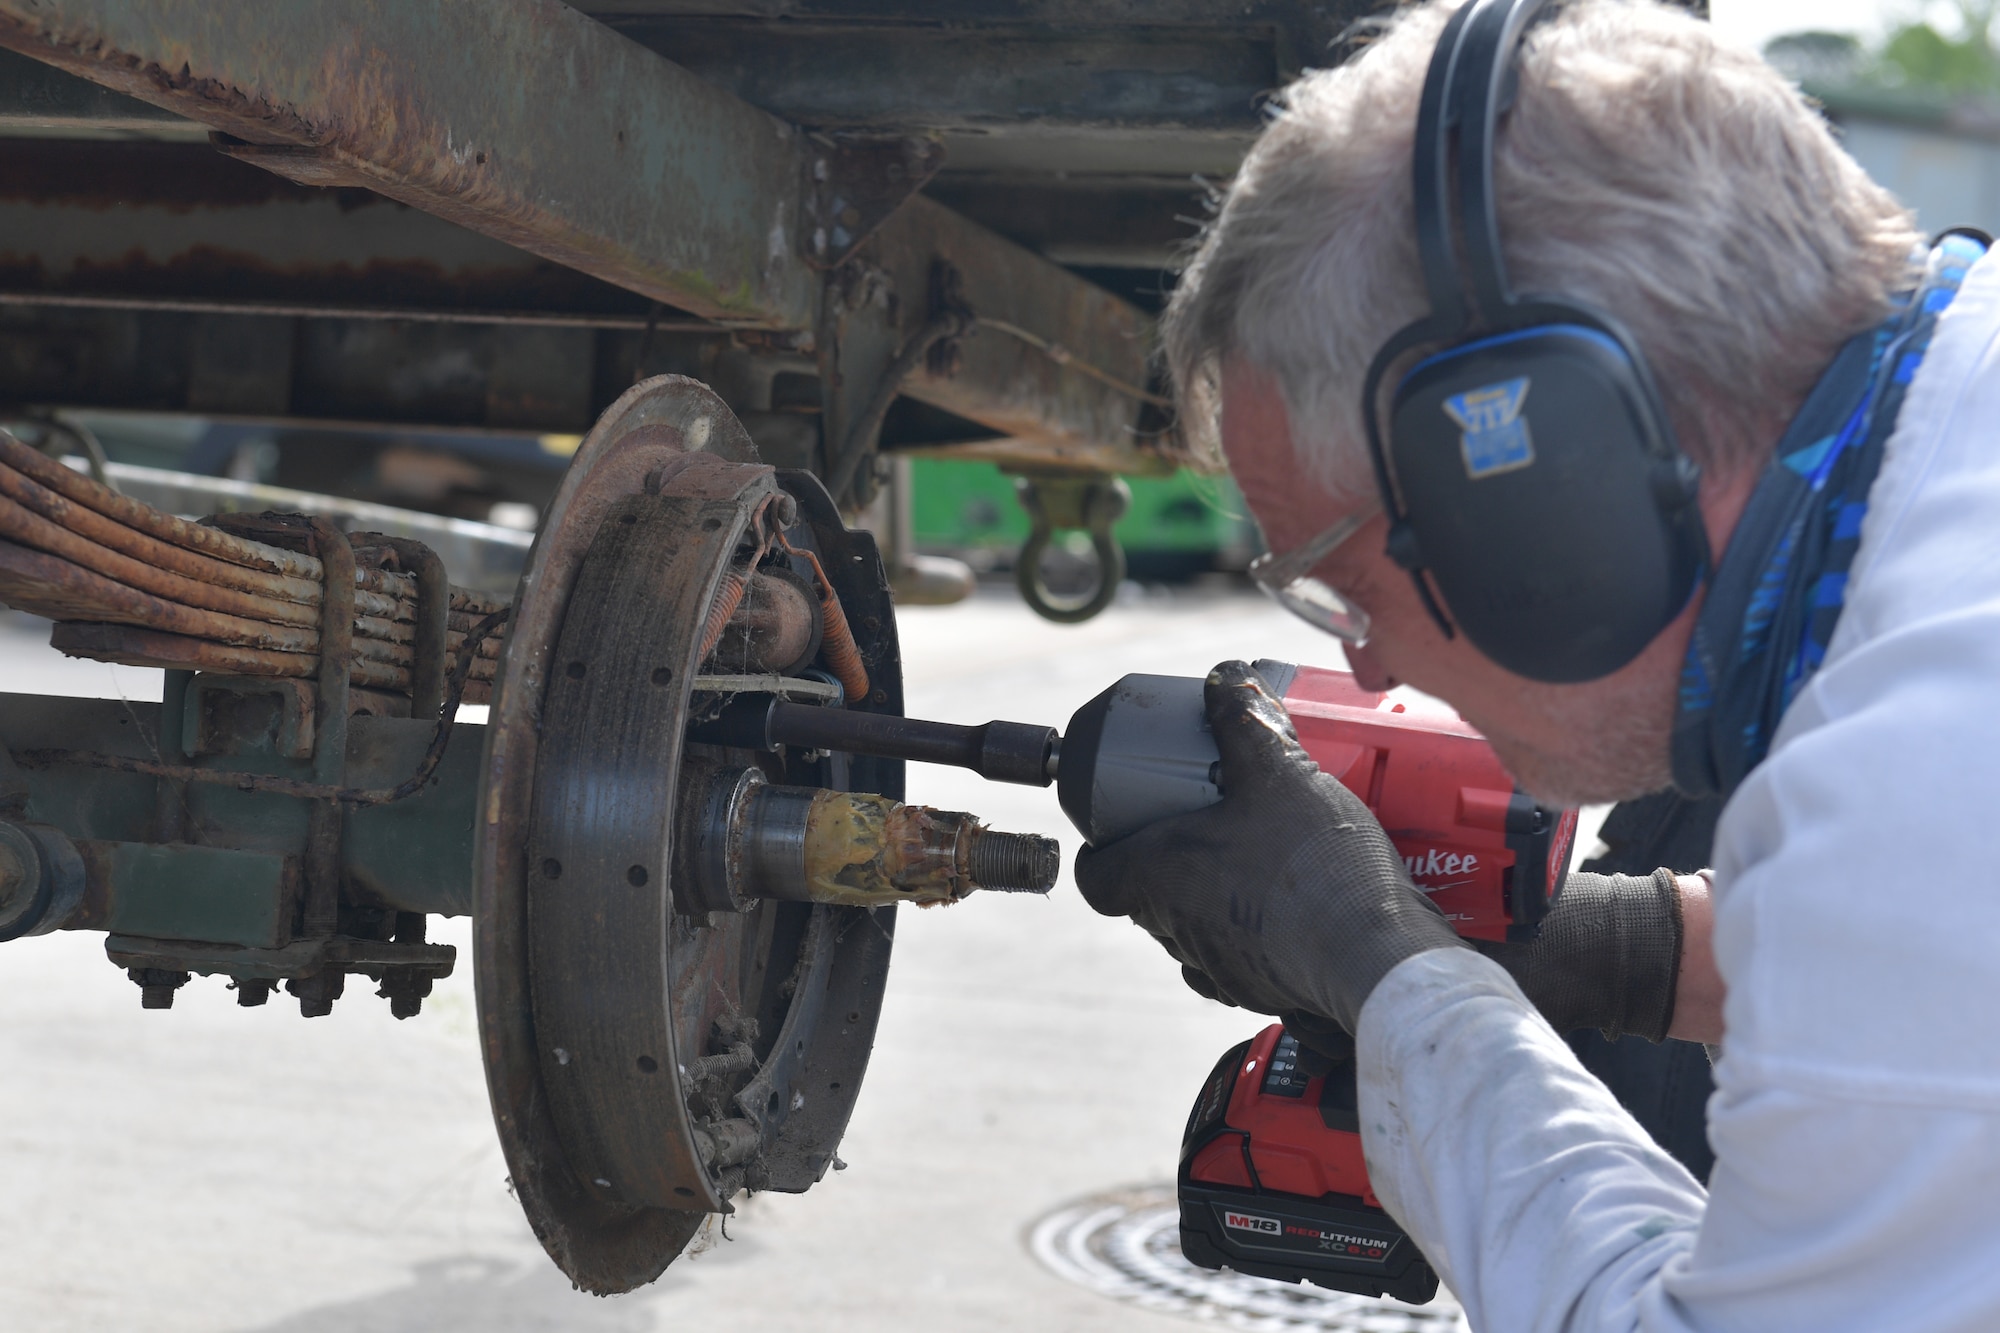 A mechanic working on a brake assembly with a power drill.